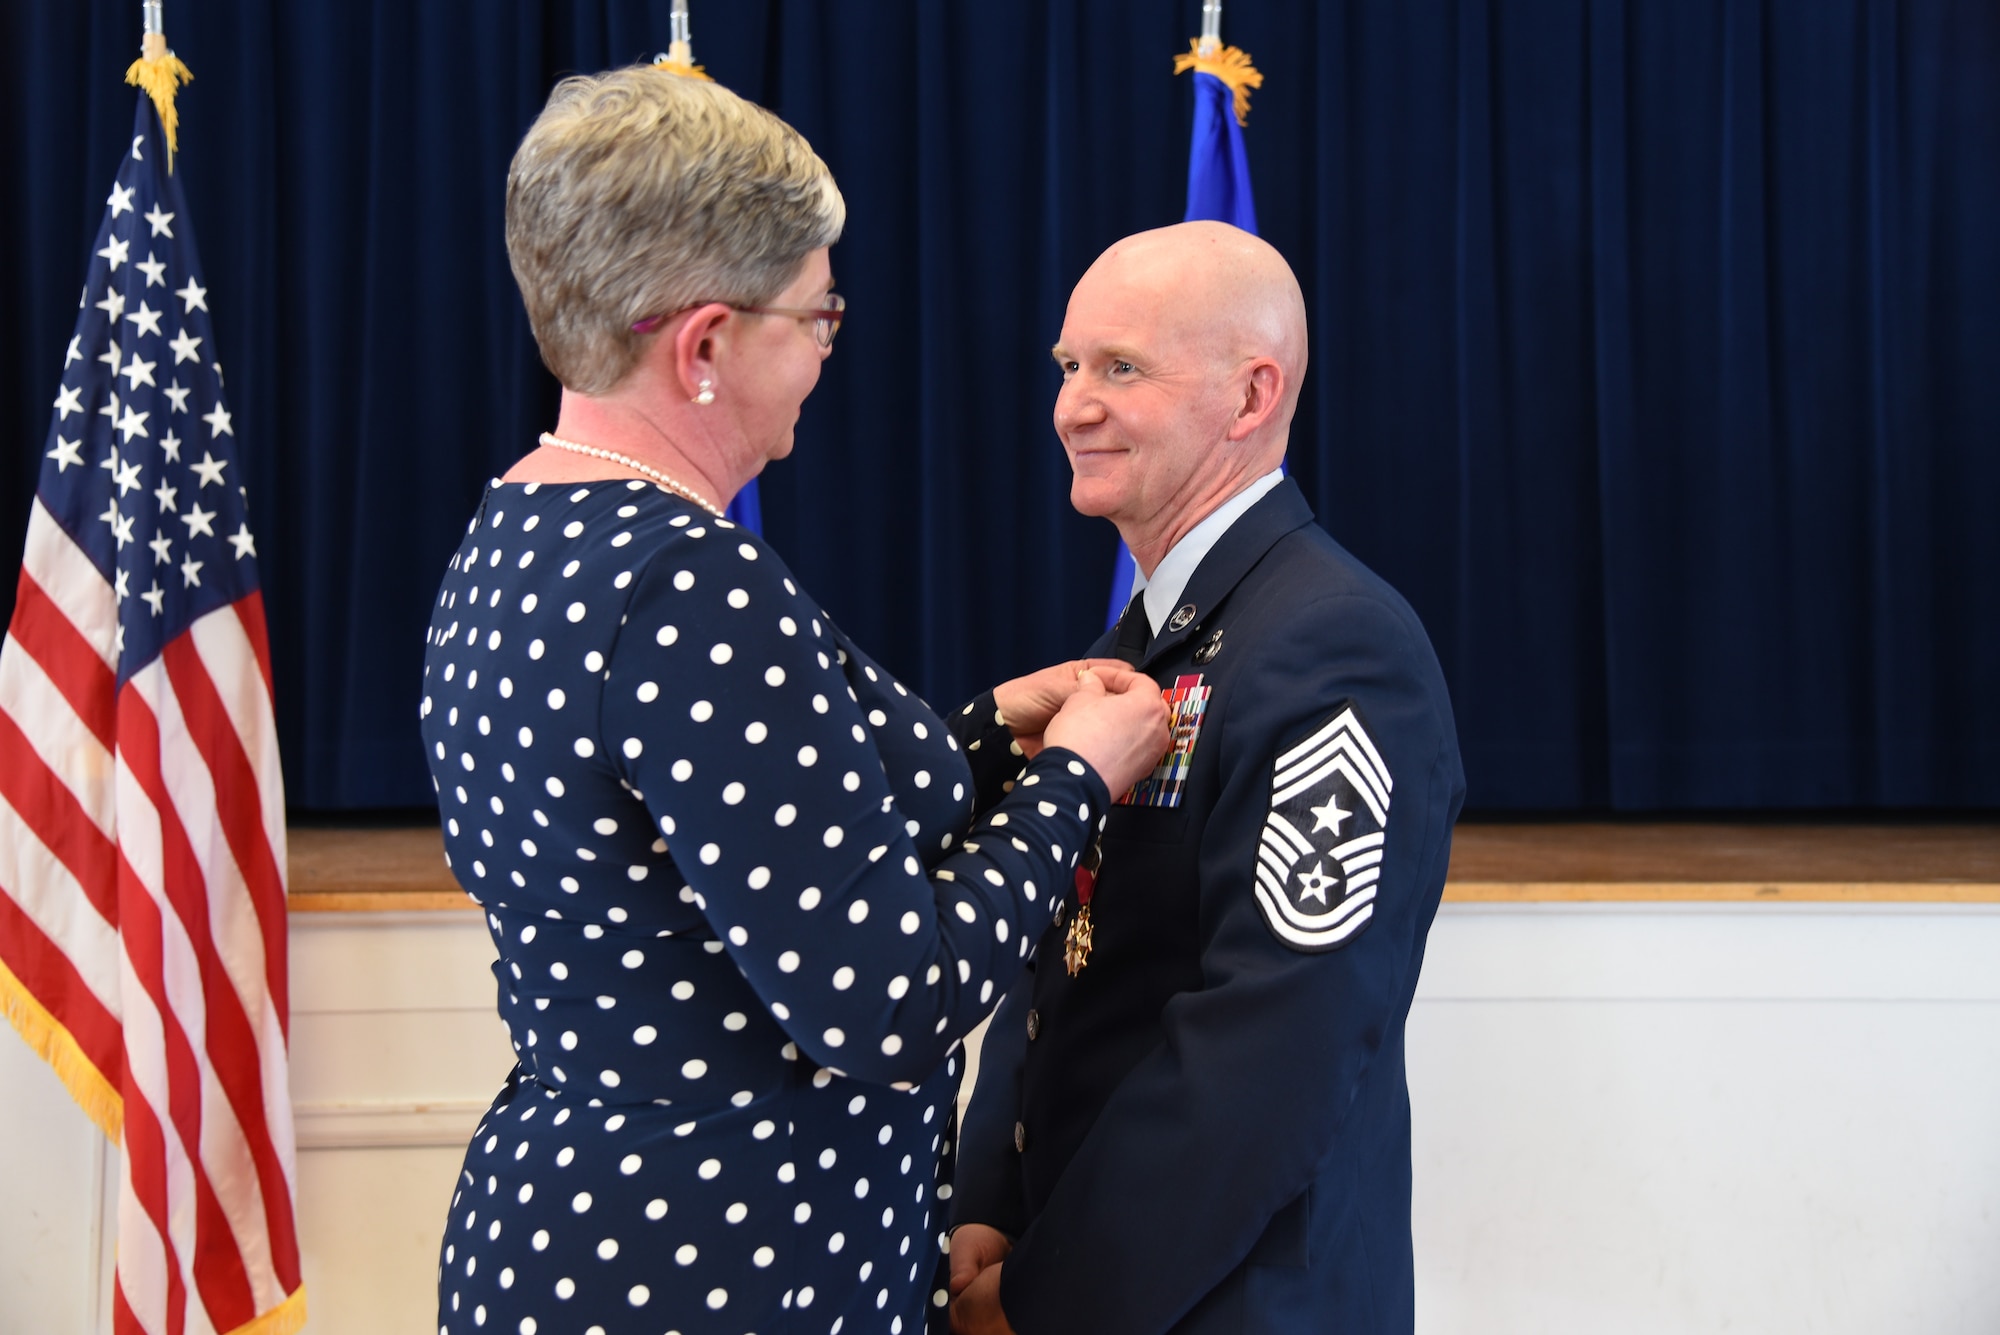 Tennie Good pins on the retirement pin on the lapel of Chief Master Sgt. Thomas F. Good, 20th Air Force command chief, during his retirement ceremony March 5, 2019, at F. E. Warren Air Force Base, Wyo. Chief Good retired as the 20th Air Force command chief in the presence of his wife, children and friends. (U.S. Air Force photo by Senior Airman Nicole Reed)